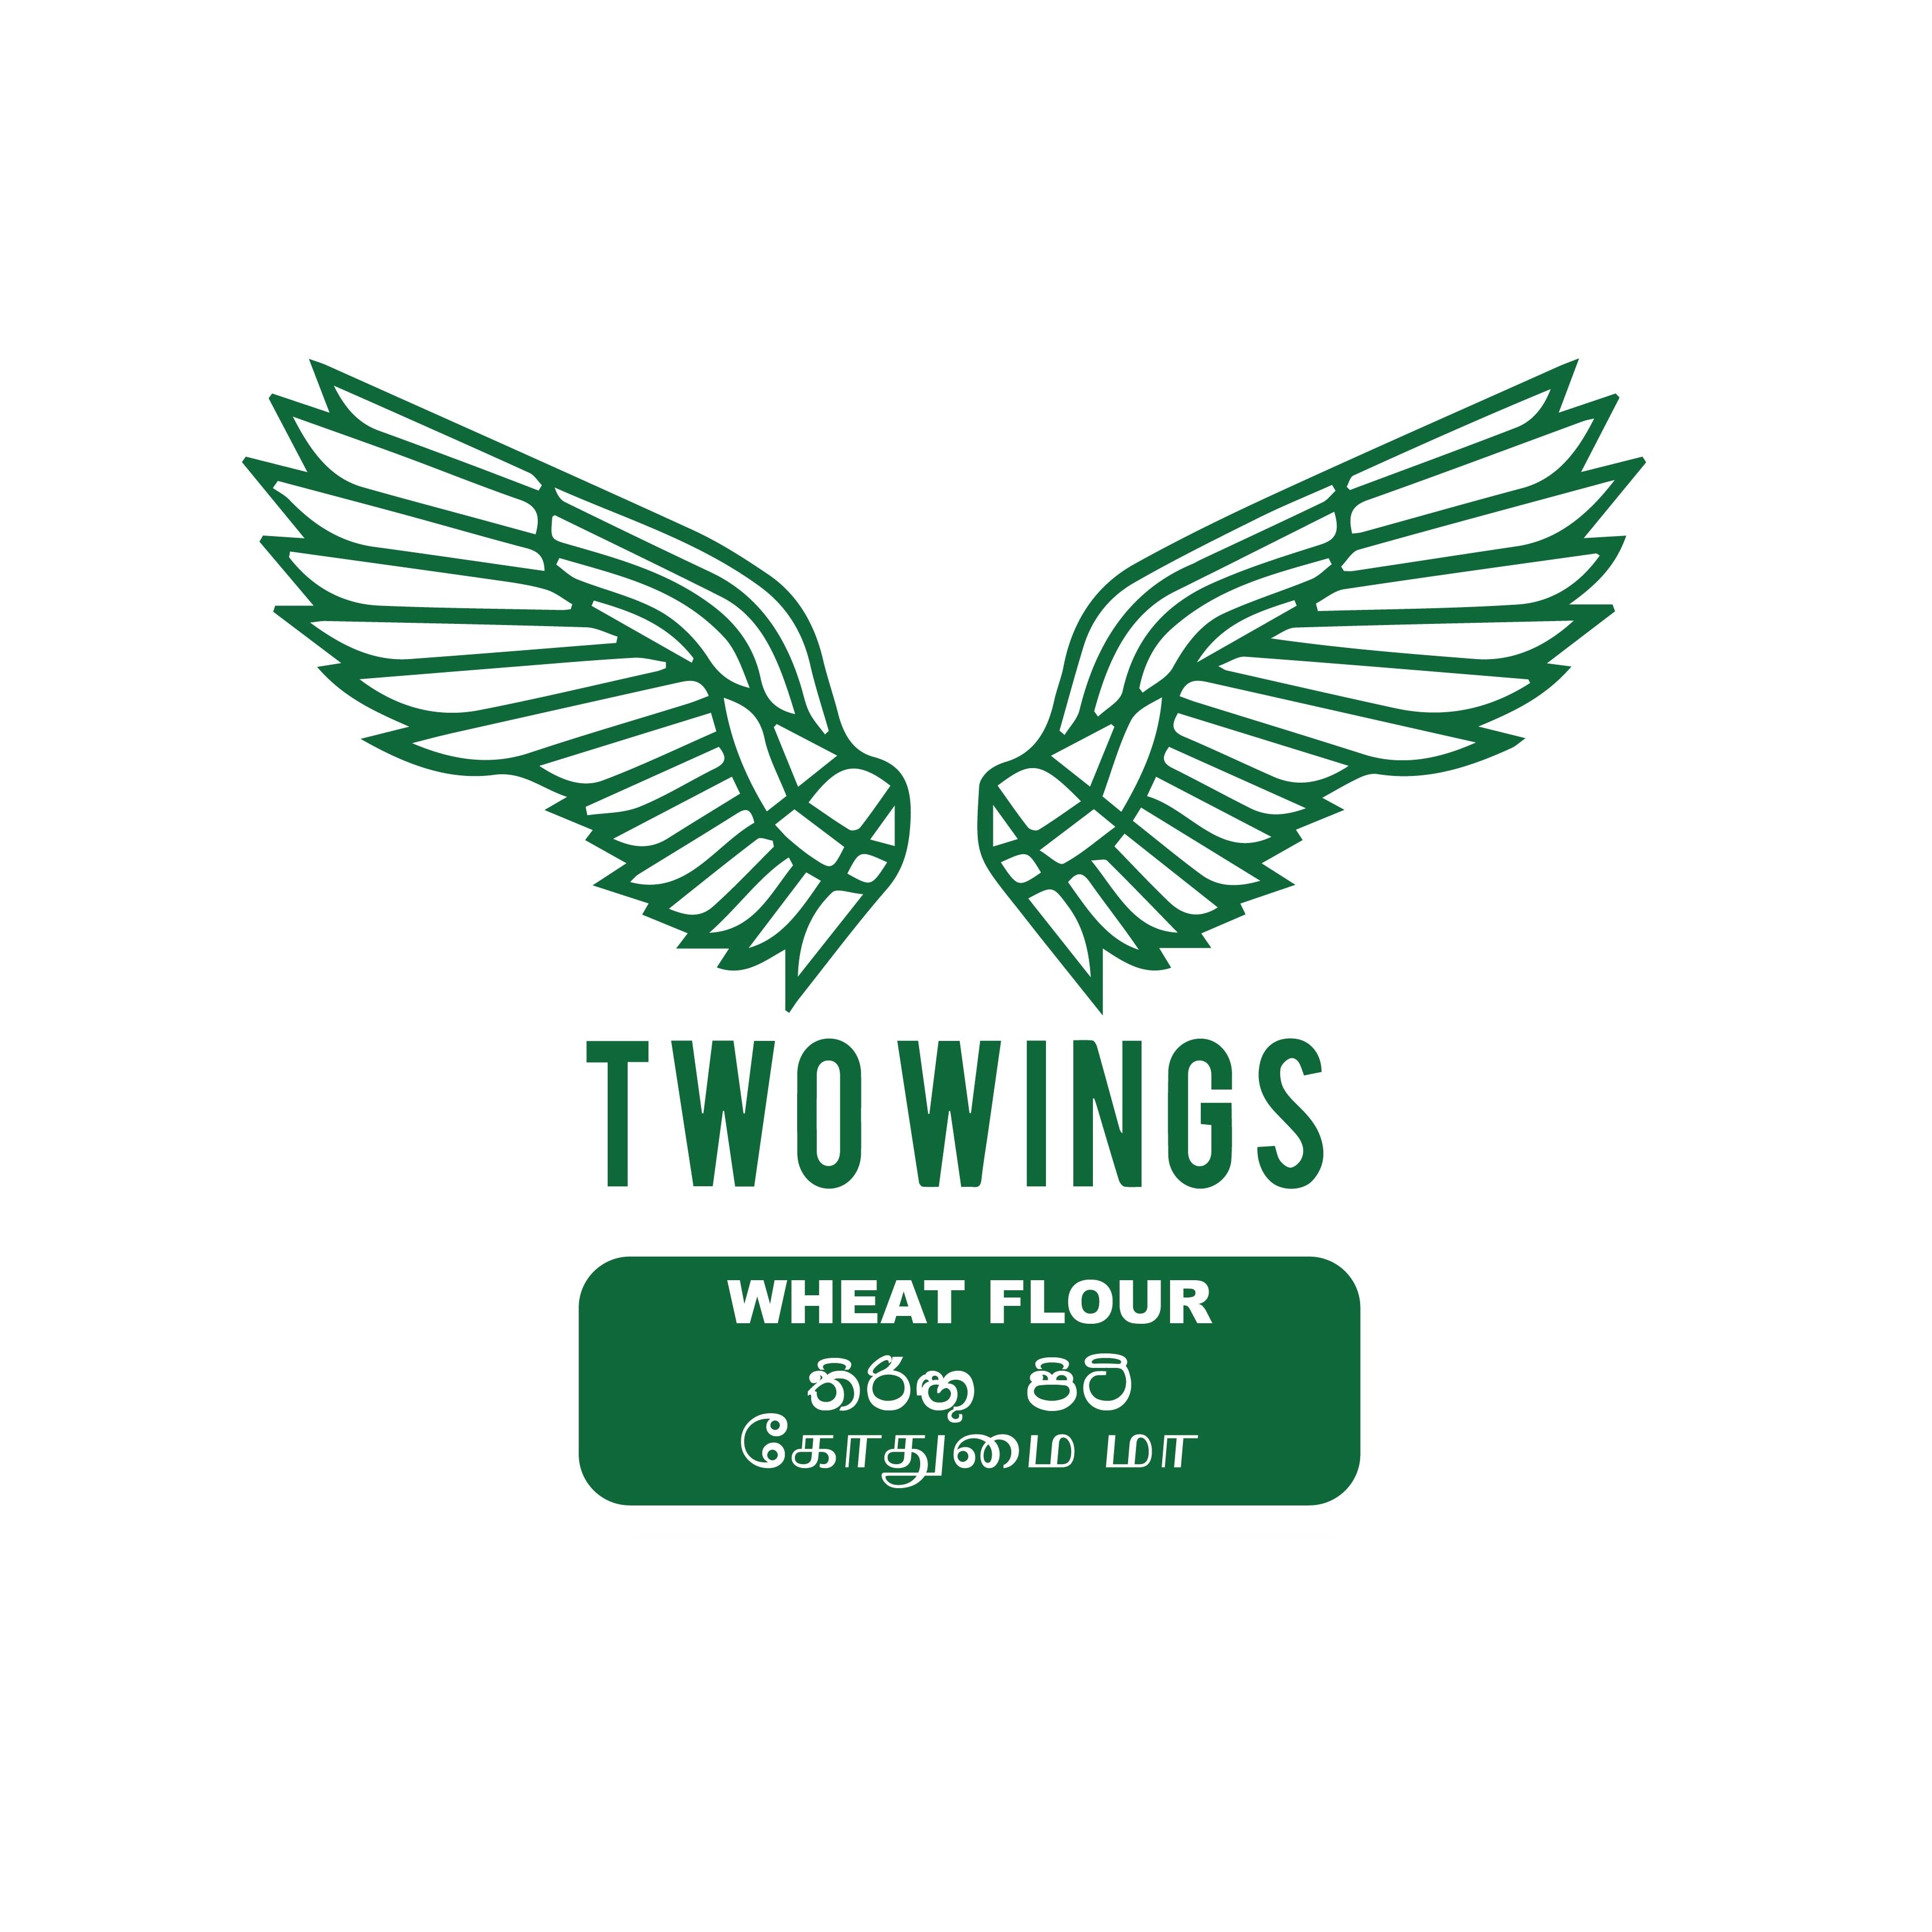 TWO WINGS WHEAT FLOUR